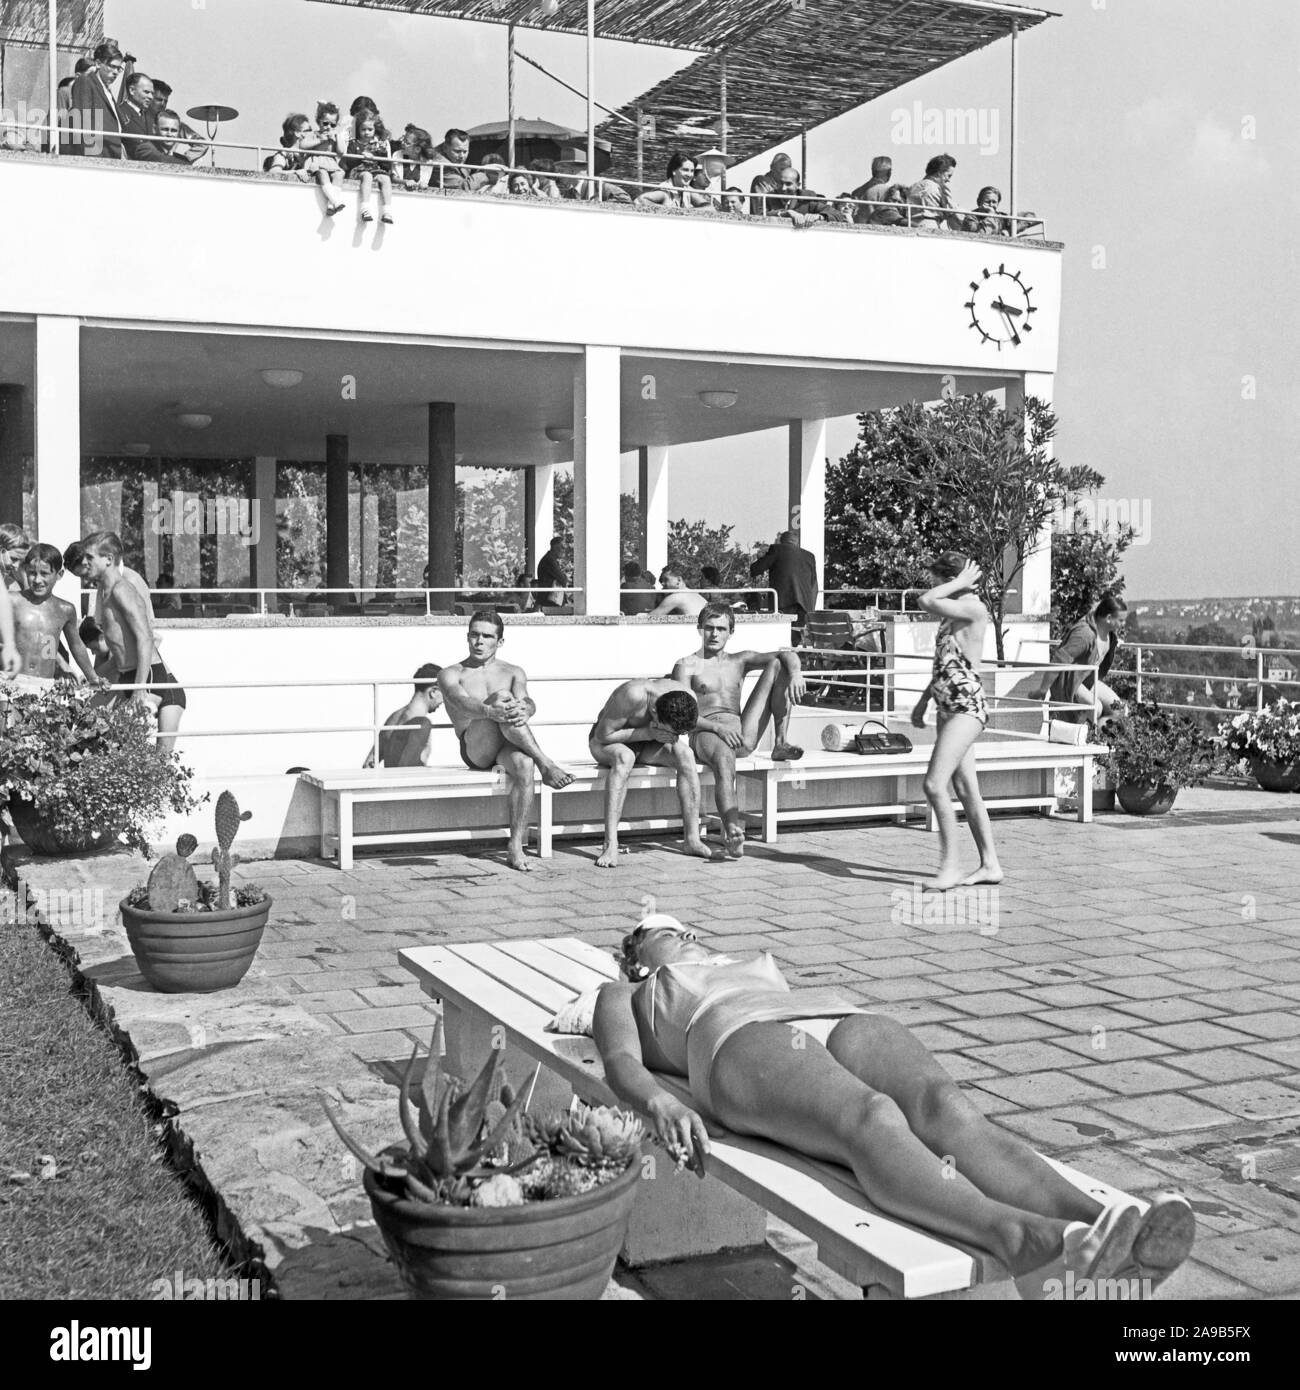 Afternoon relaxing at Neroberg hill in the North of Wiesbaden, Germany 1950s. Stock Photo